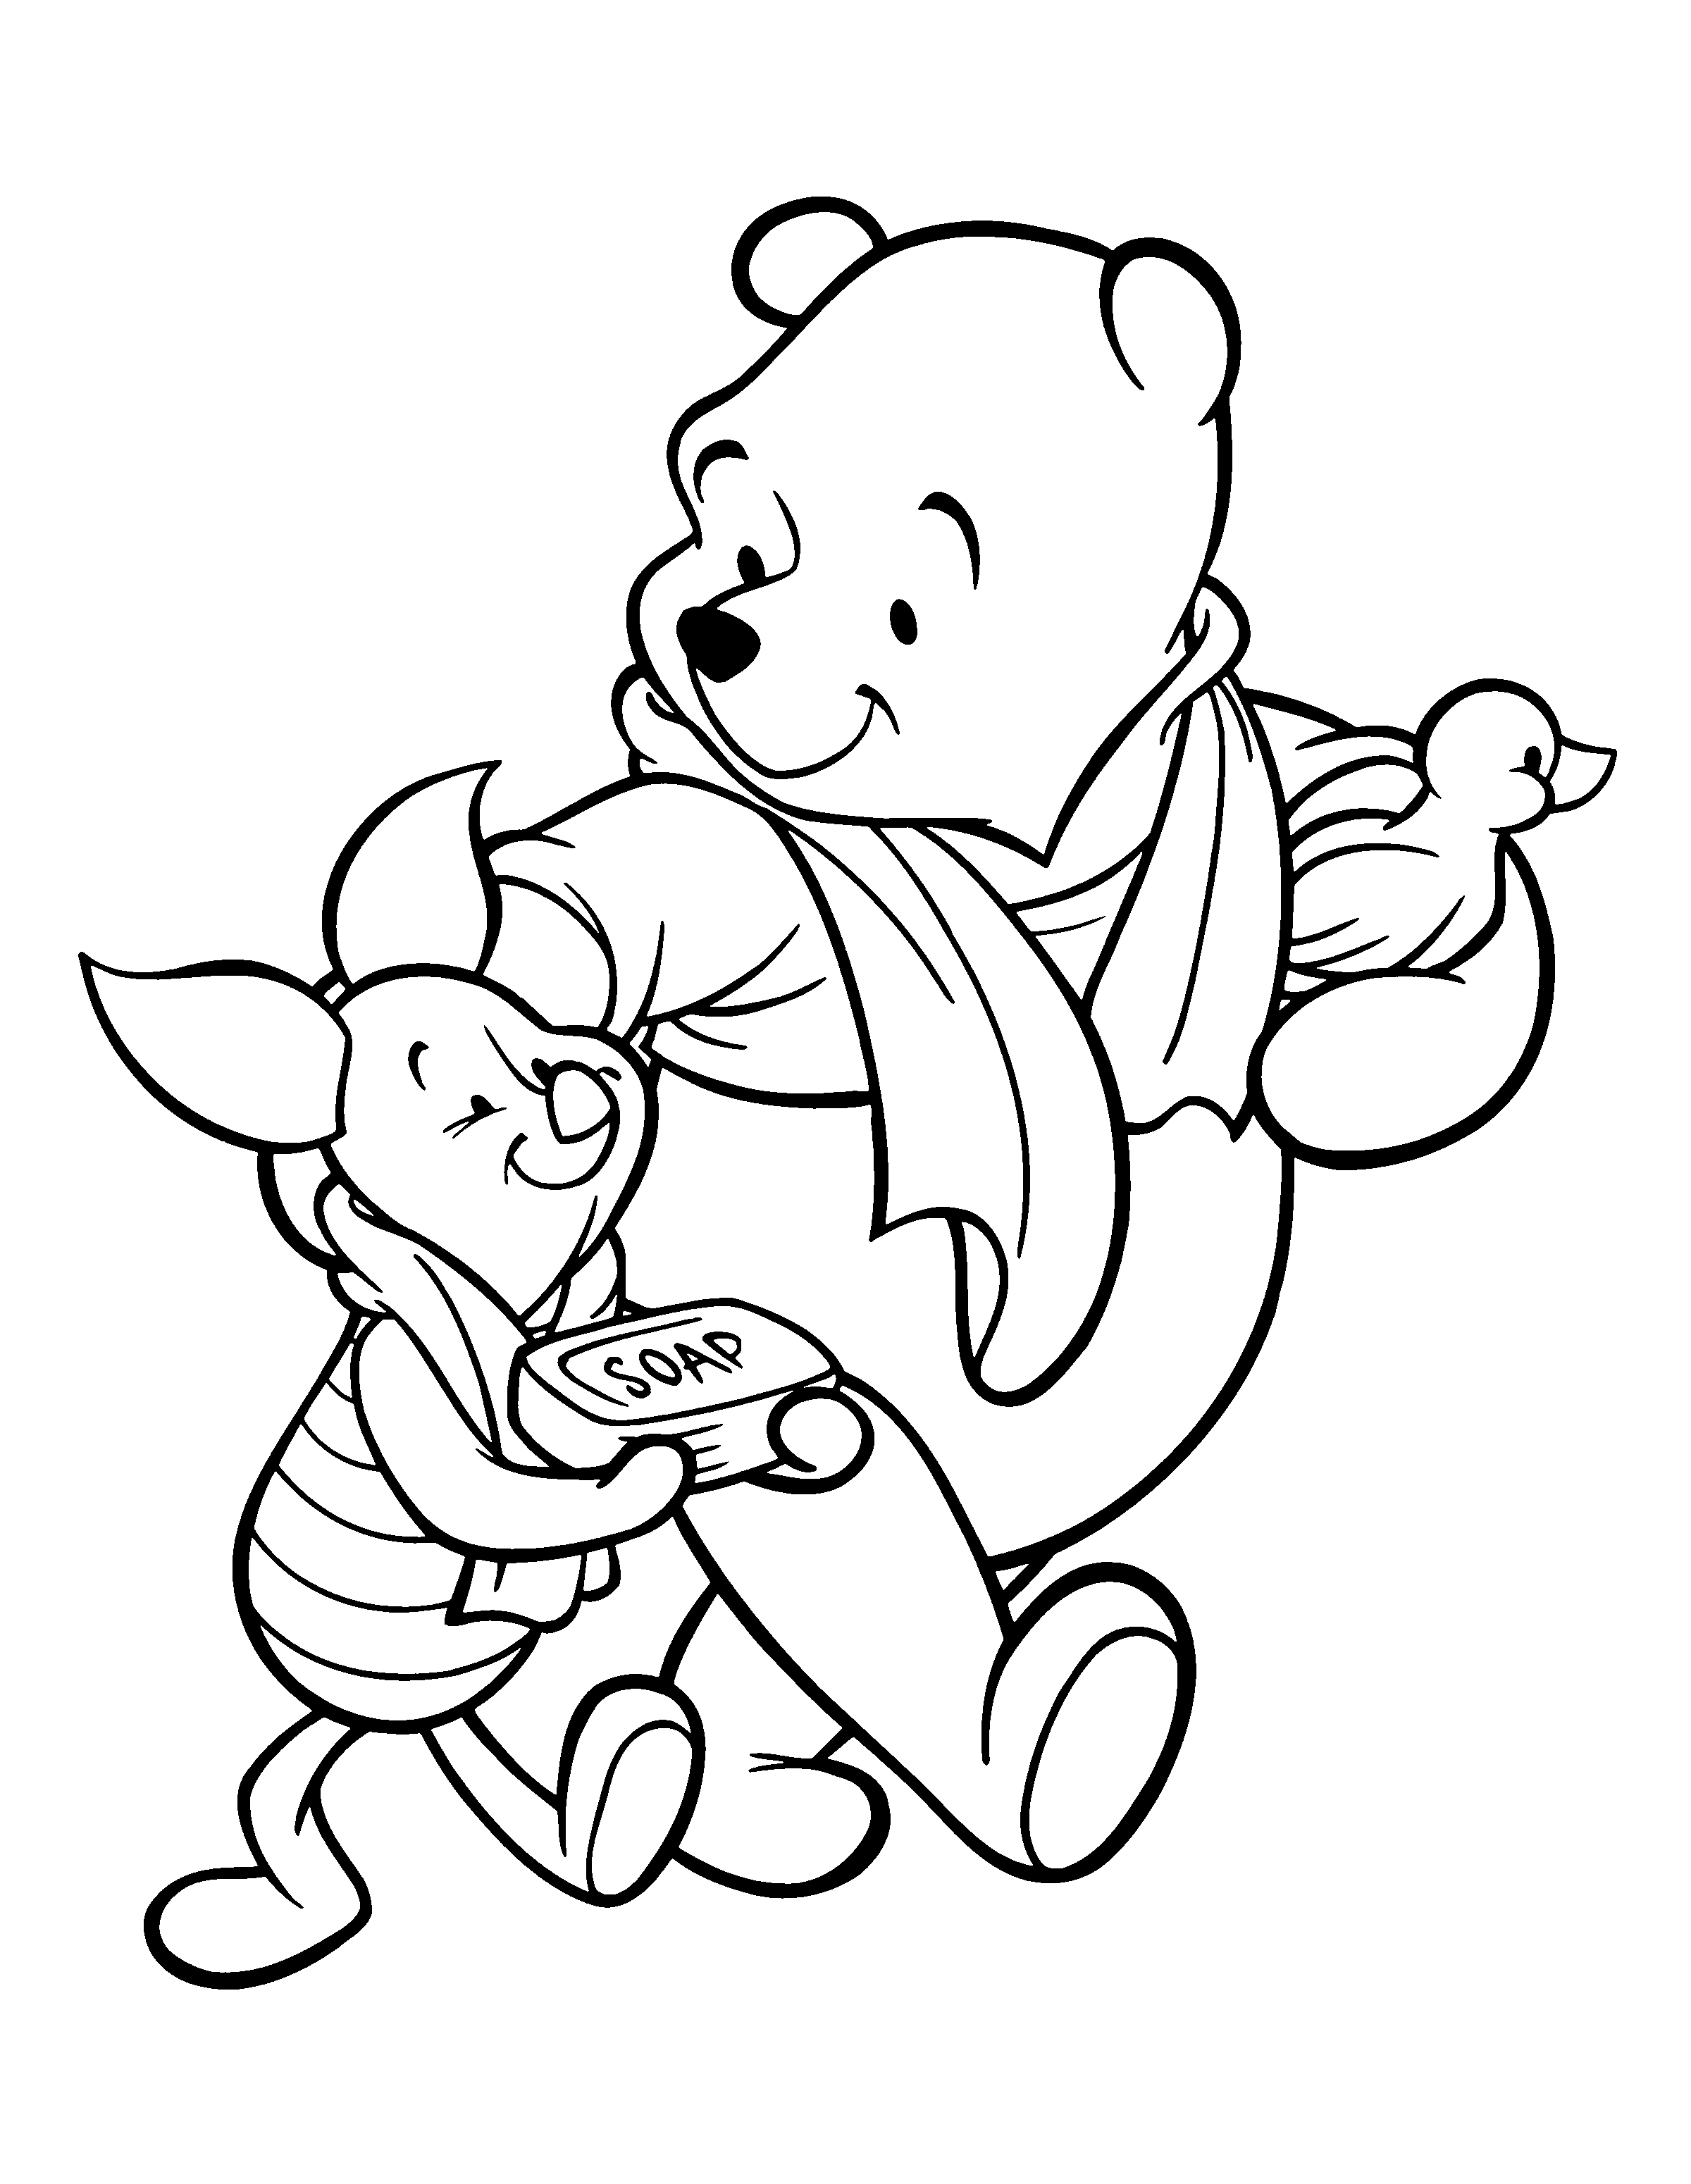 animated-coloring-pages-winnie-the-pooh-image-0115